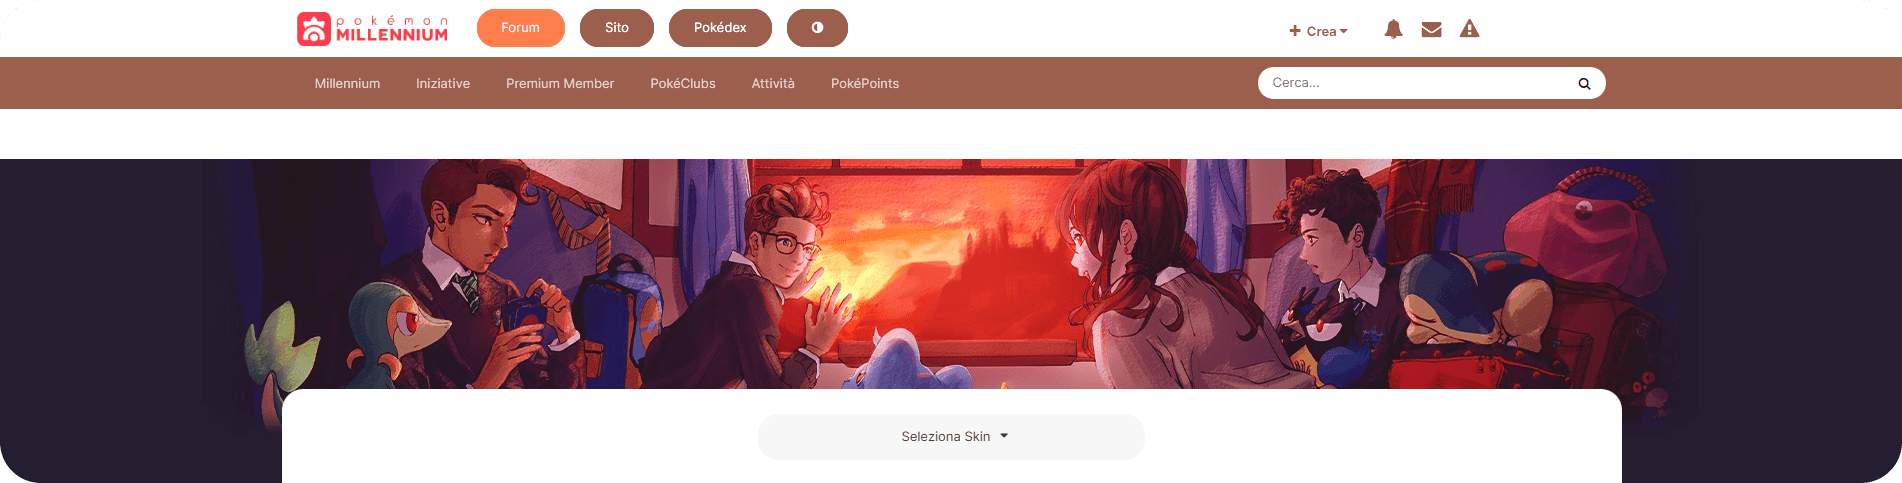 wizarding-chronicles-mockup.png